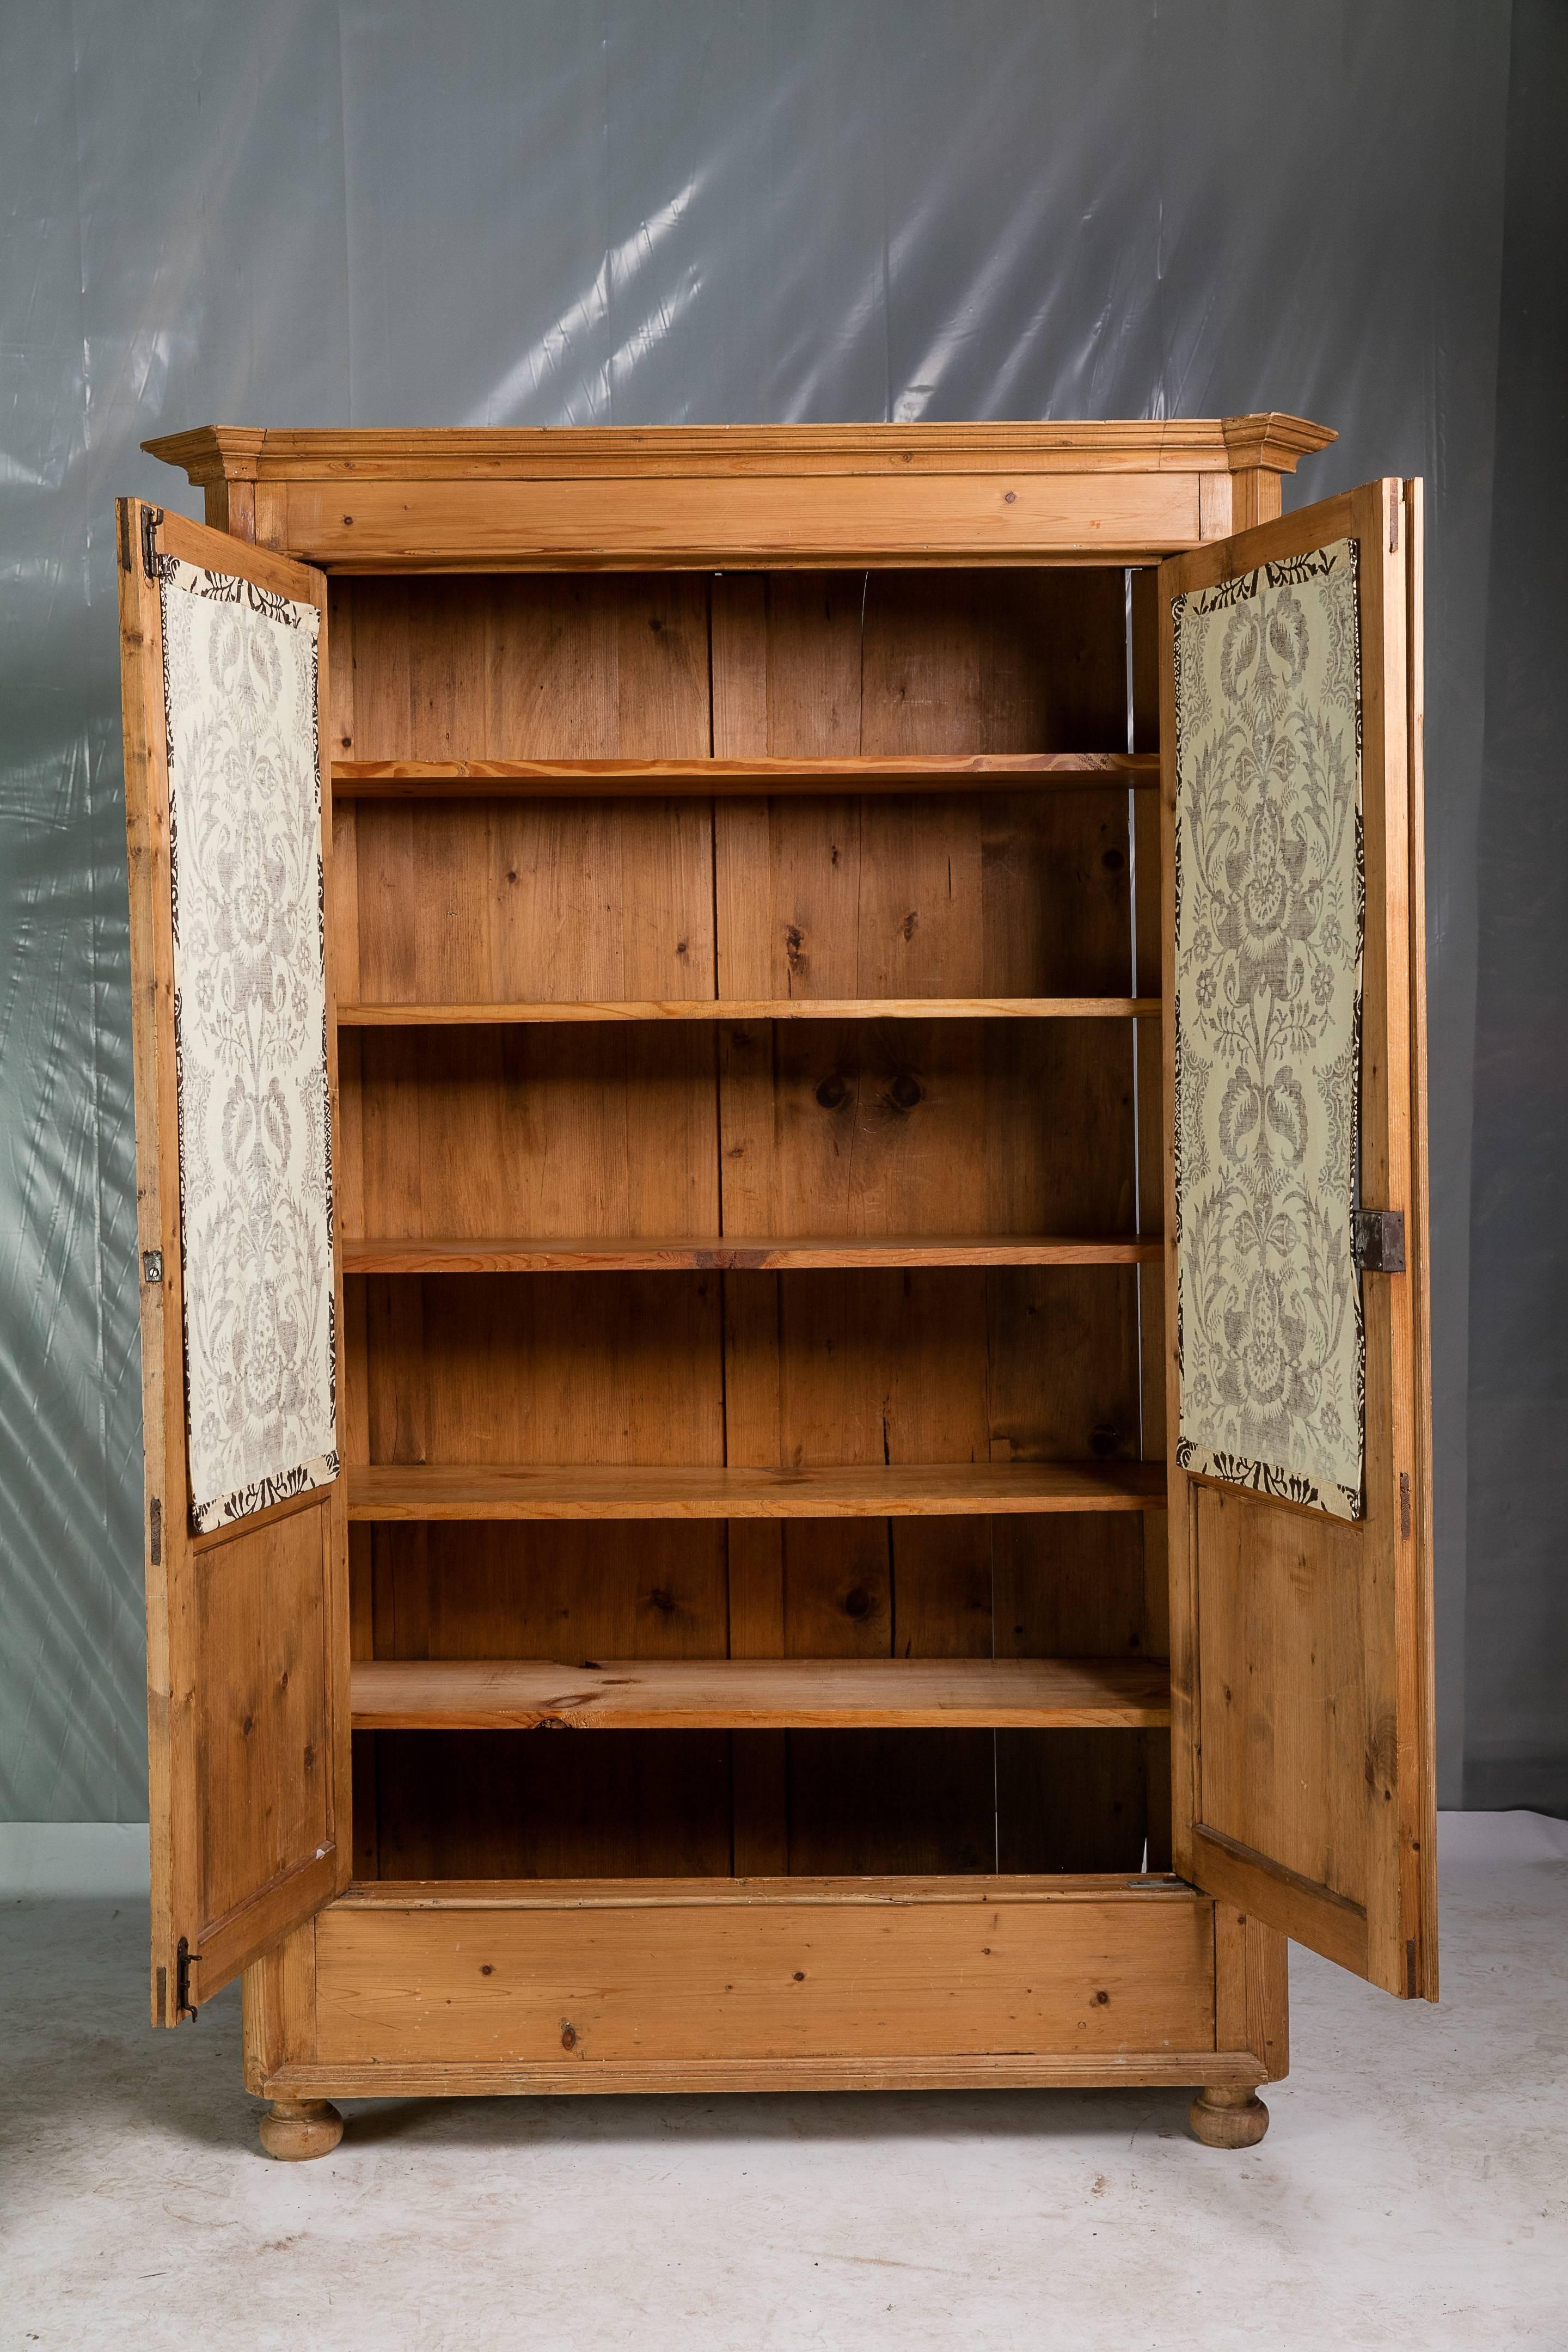 Mid-19th century pine armoire with paneled glass doors and five pine shelves. The shelves are a recent addition and rest on wood brackets that have been fixed in place for added stability. The glass portion of the doors have been covered from the